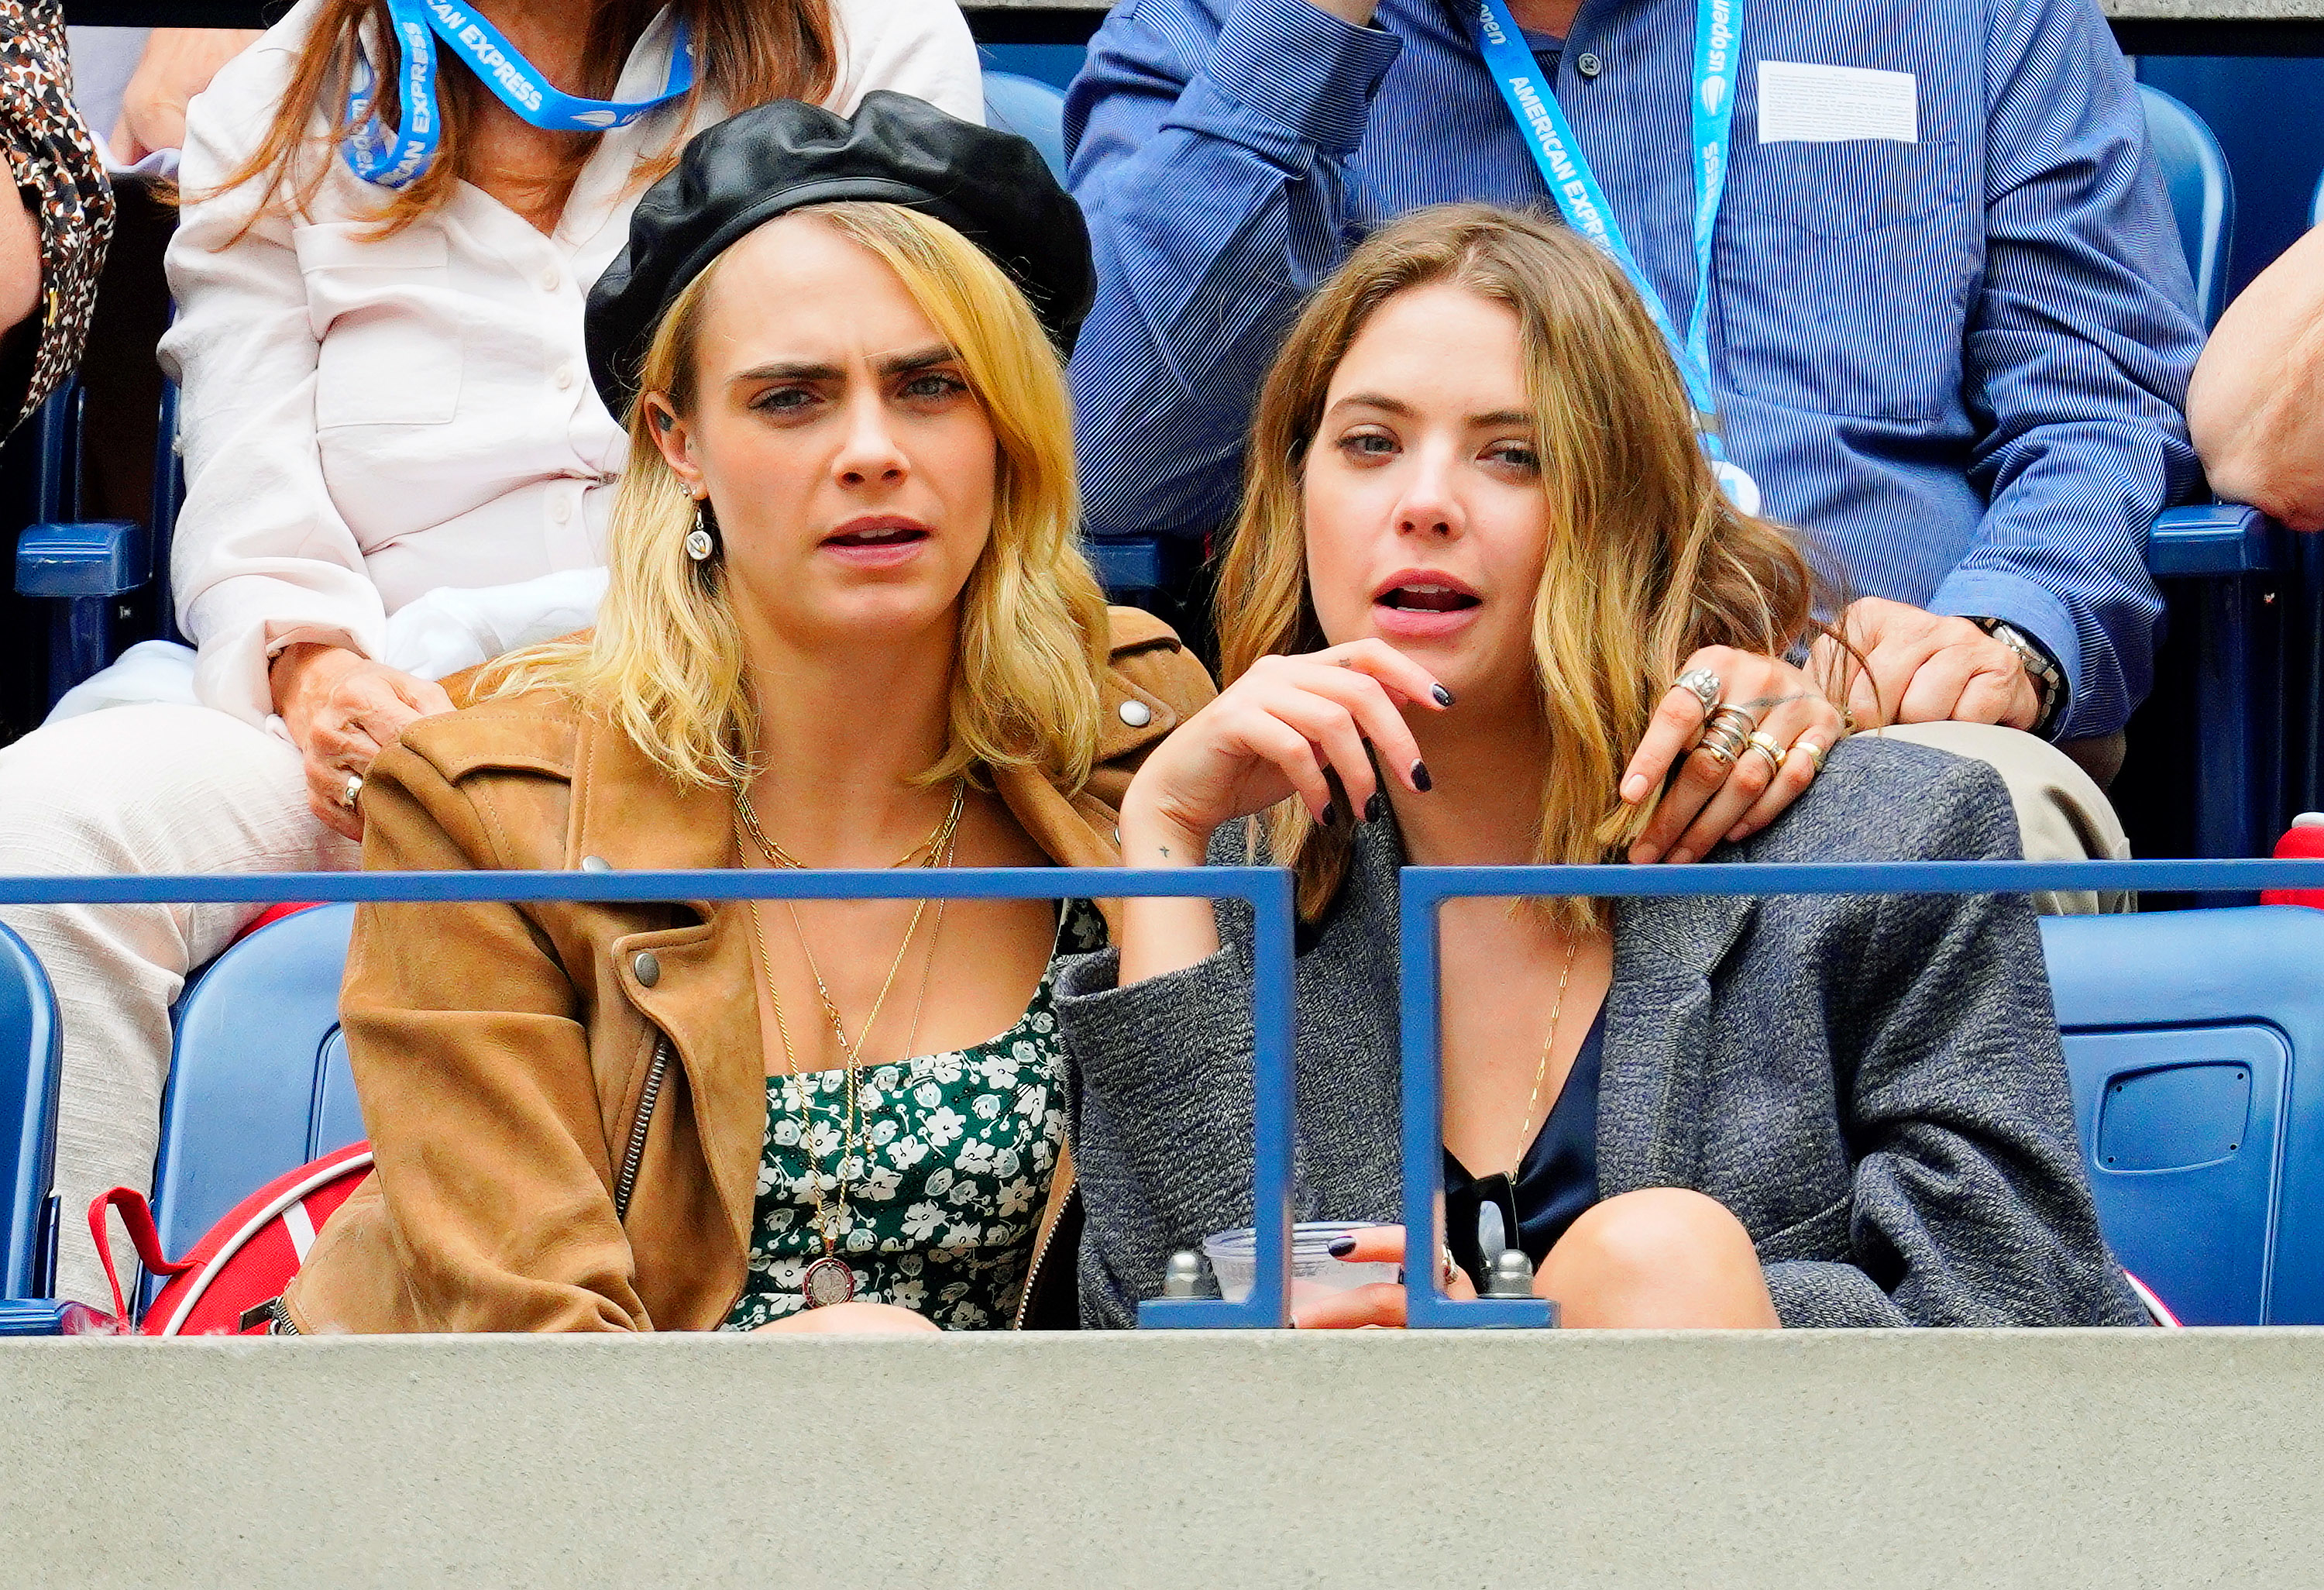 Two women in casual attire sitting and watching an event, showing surprised facial expressions